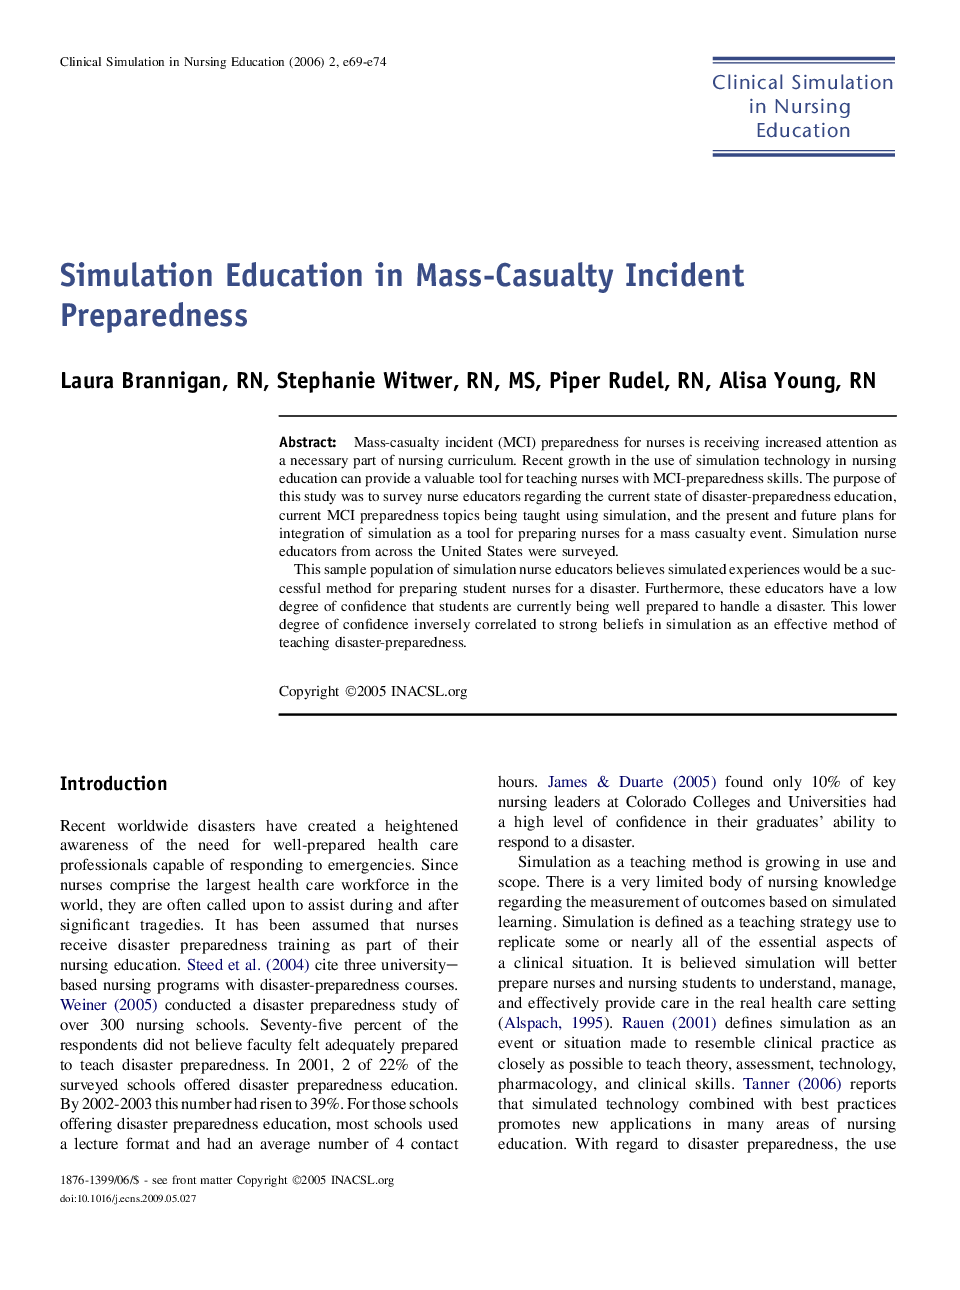 Simulation Education in Mass-Casualty Incident Preparedness